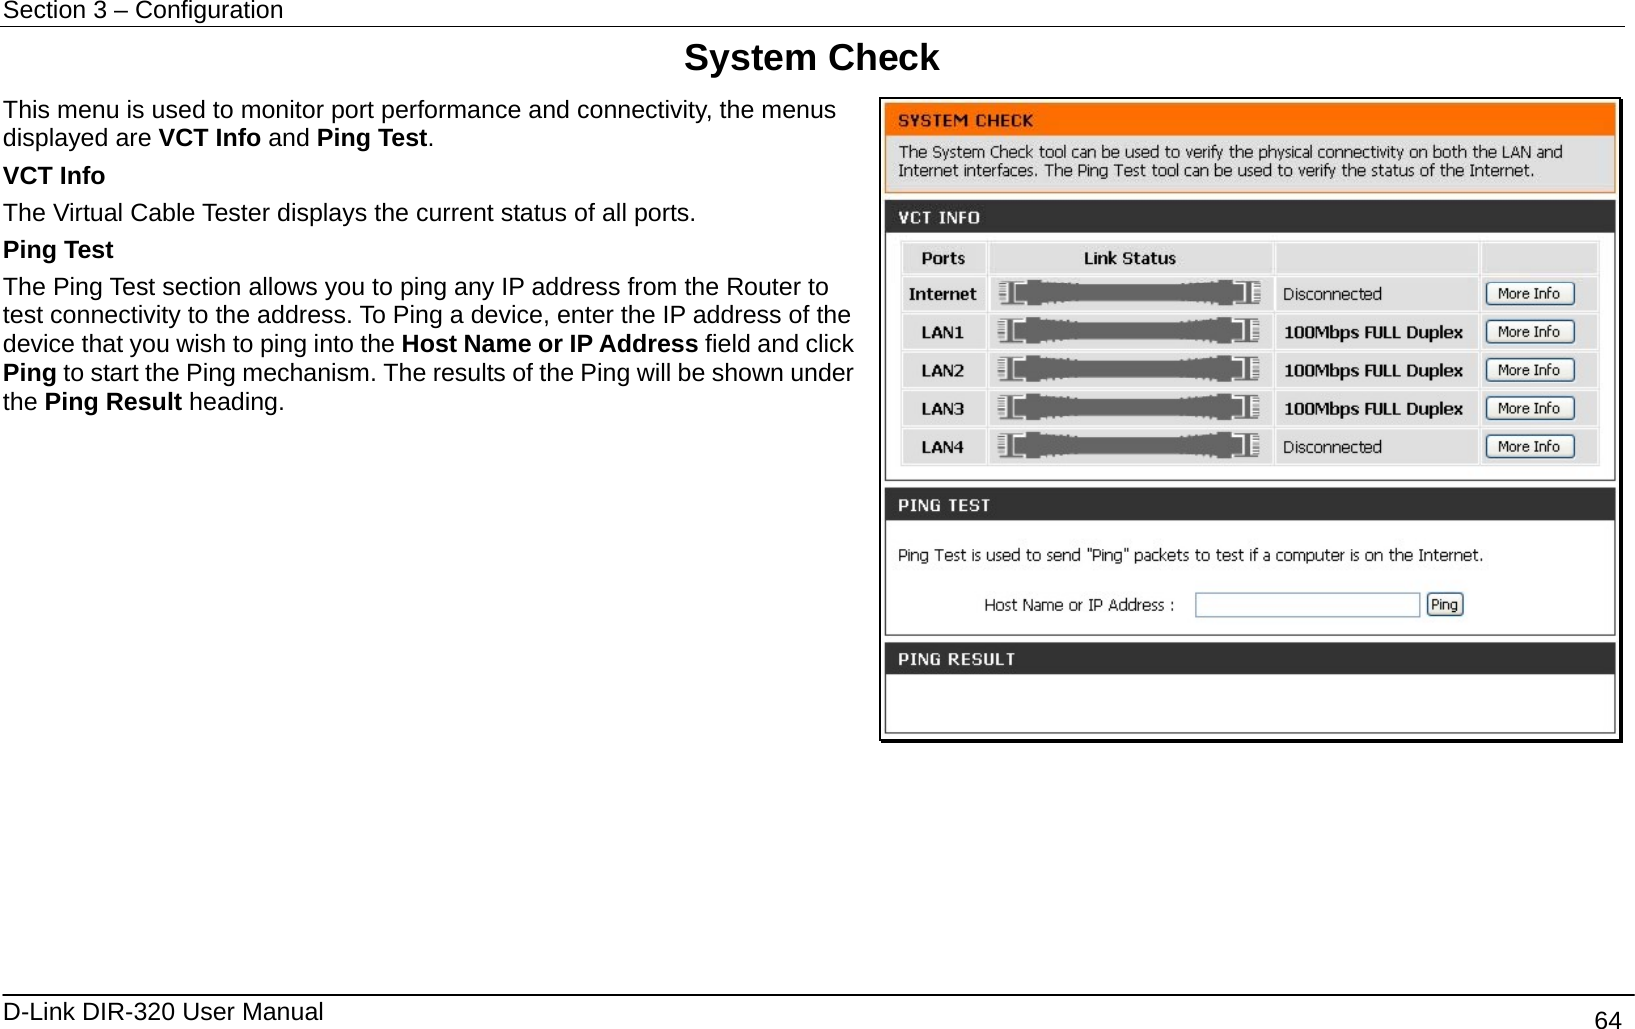 Section 3 – Configuration   D-Link DIR-320 User Manual                                       64 System Check This menu is used to monitor port performance and connectivity, the menus displayed are VCT Info and Ping Test. VCT Info The Virtual Cable Tester displays the current status of all ports. Ping Test The Ping Test section allows you to ping any IP address from the Router to test connectivity to the address. To Ping a device, enter the IP address of the device that you wish to ping into the Host Name or IP Address field and click Ping to start the Ping mechanism. The results of the Ping will be shown under the Ping Result heading.        